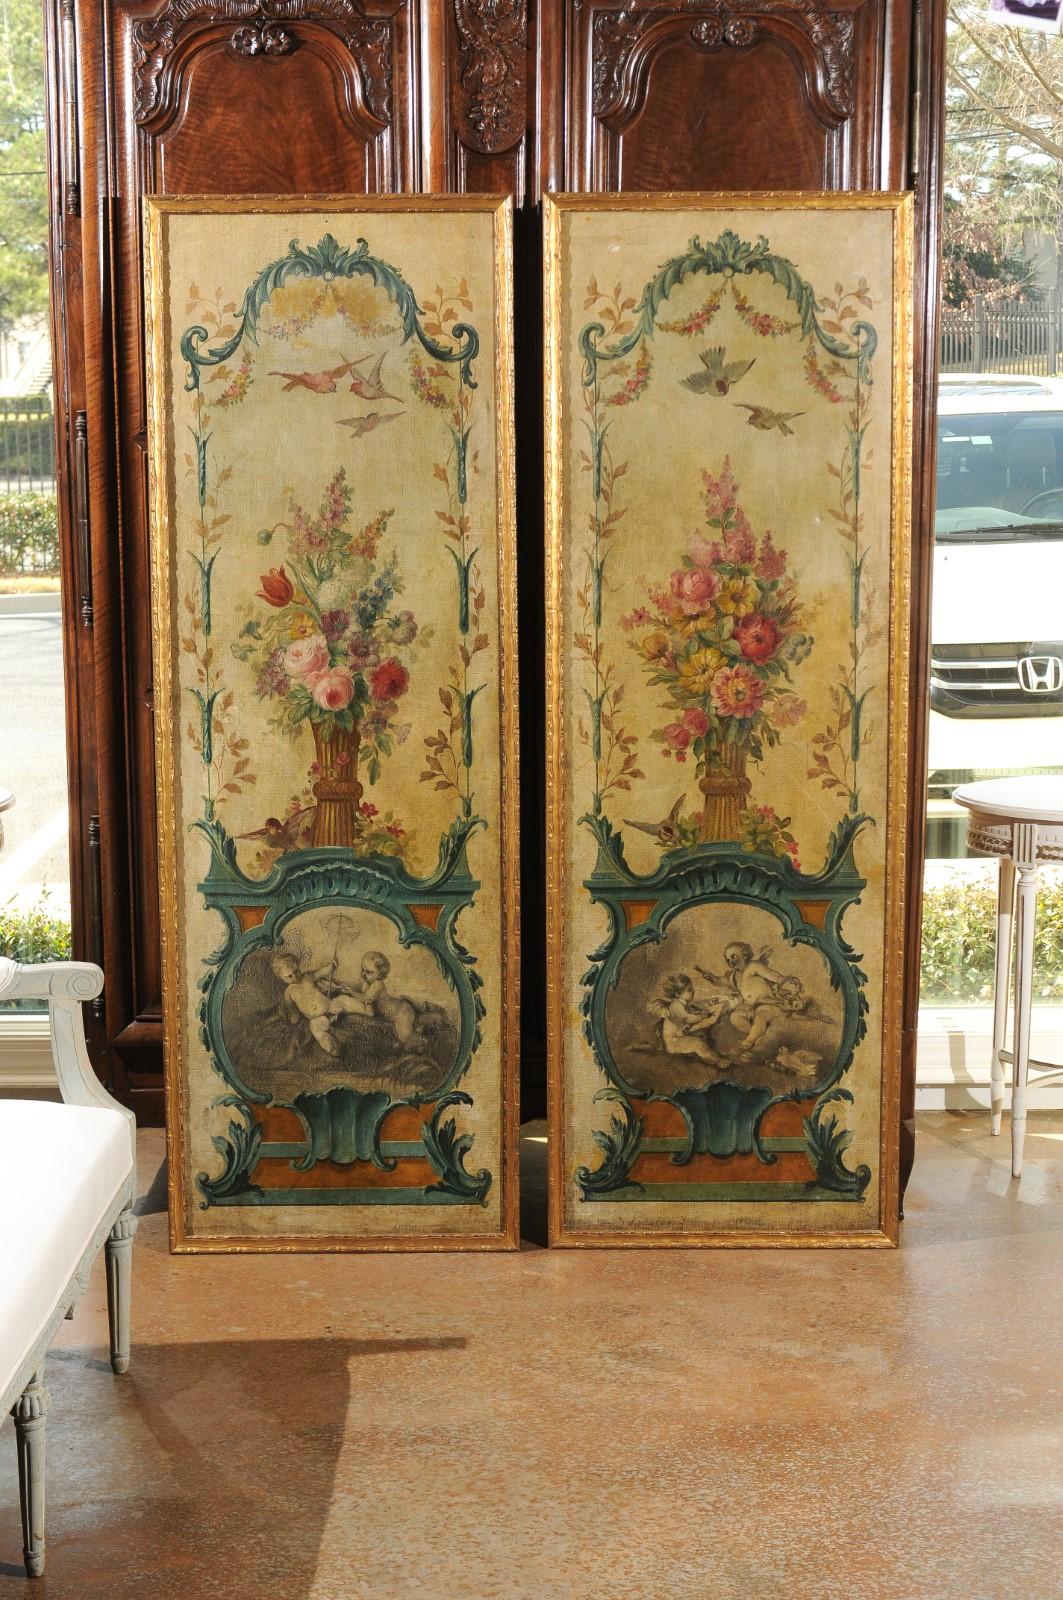 A pair of French Louis XV period framed painted panels from the 18th century, with floral, bird and angel motifs. Born in France during the reign of king Louis XV, each of this exquisite pair of panels features a lovely painted décor depicting a